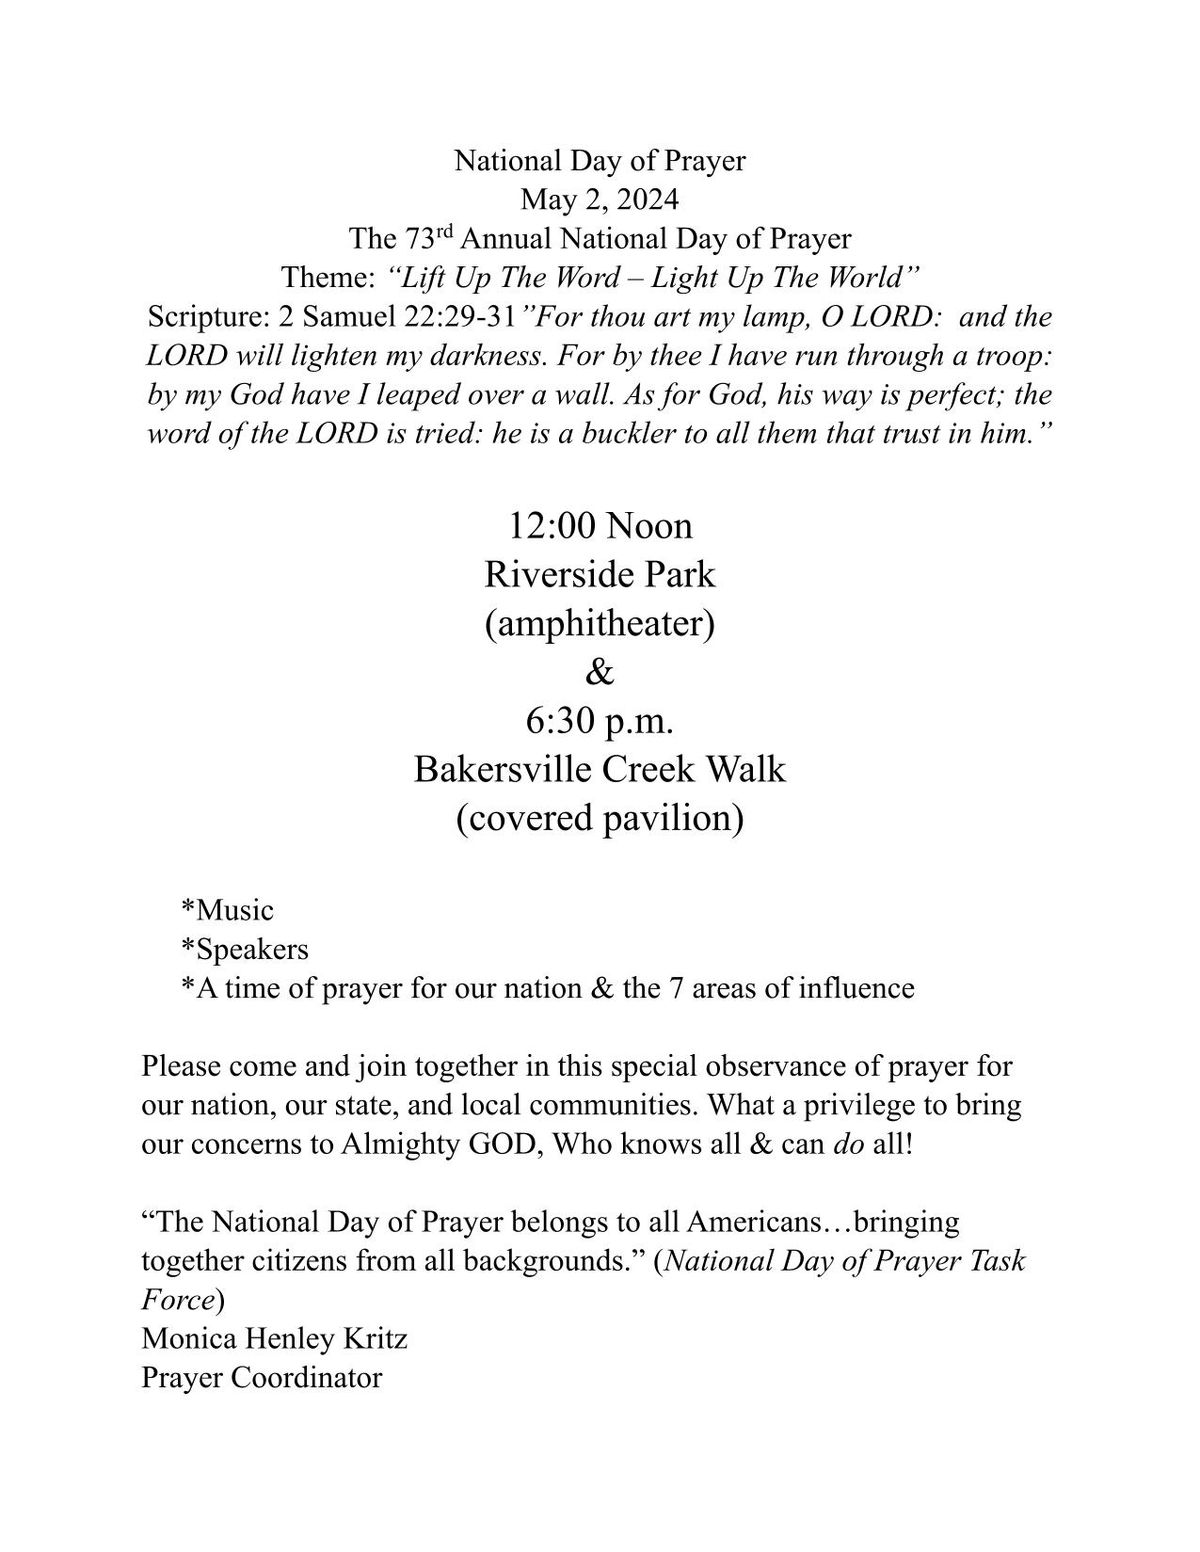 National Day of Prayer-Mitchell County Event